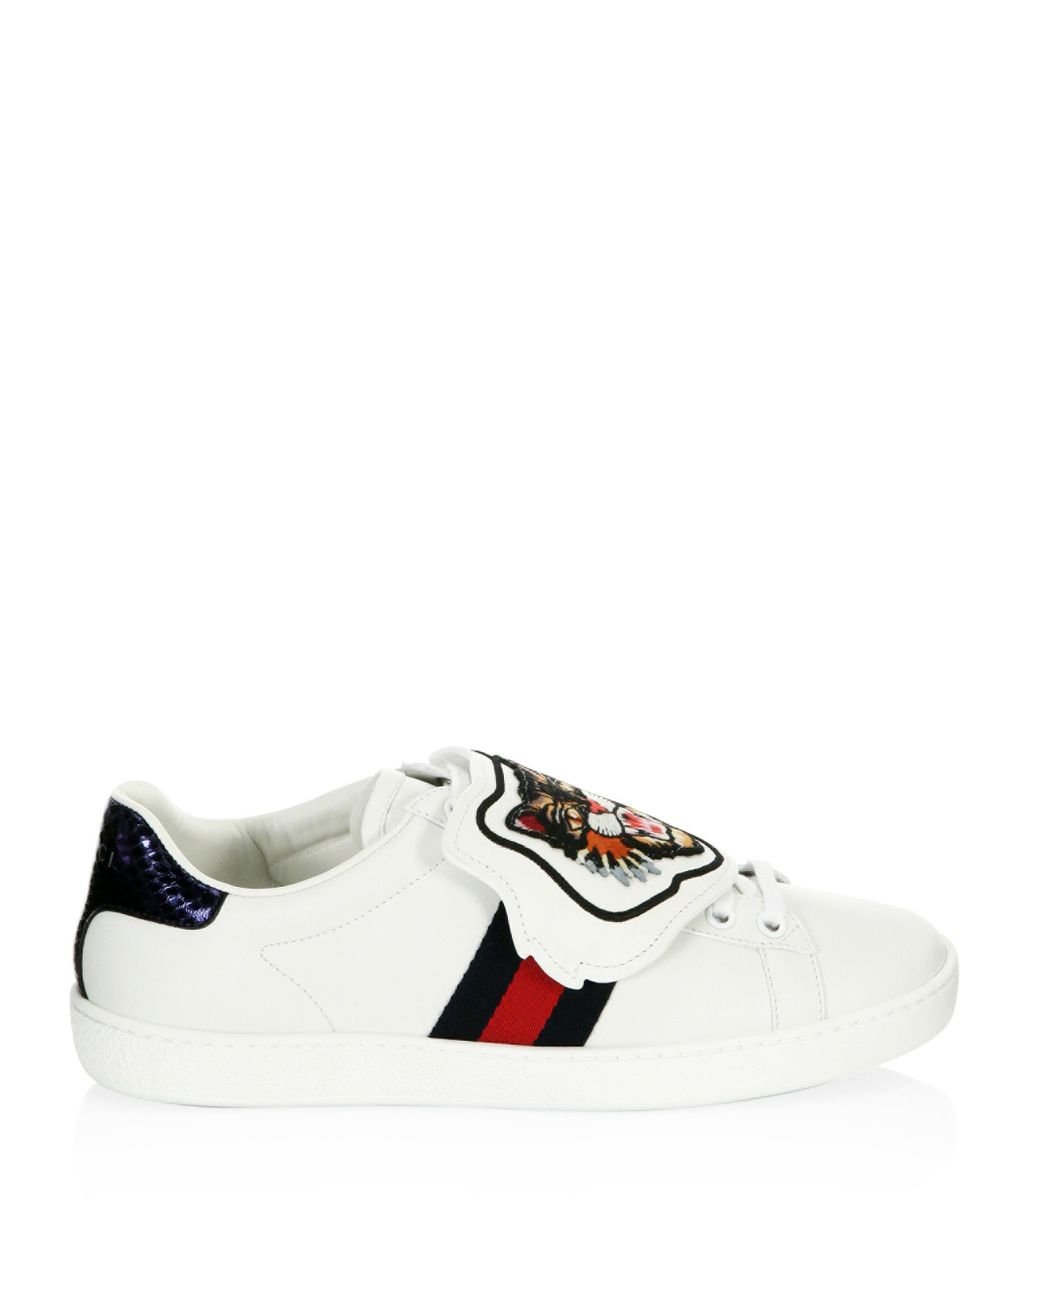 Gucci Leather New Ace Lion Patch Sneakers in White | Lyst